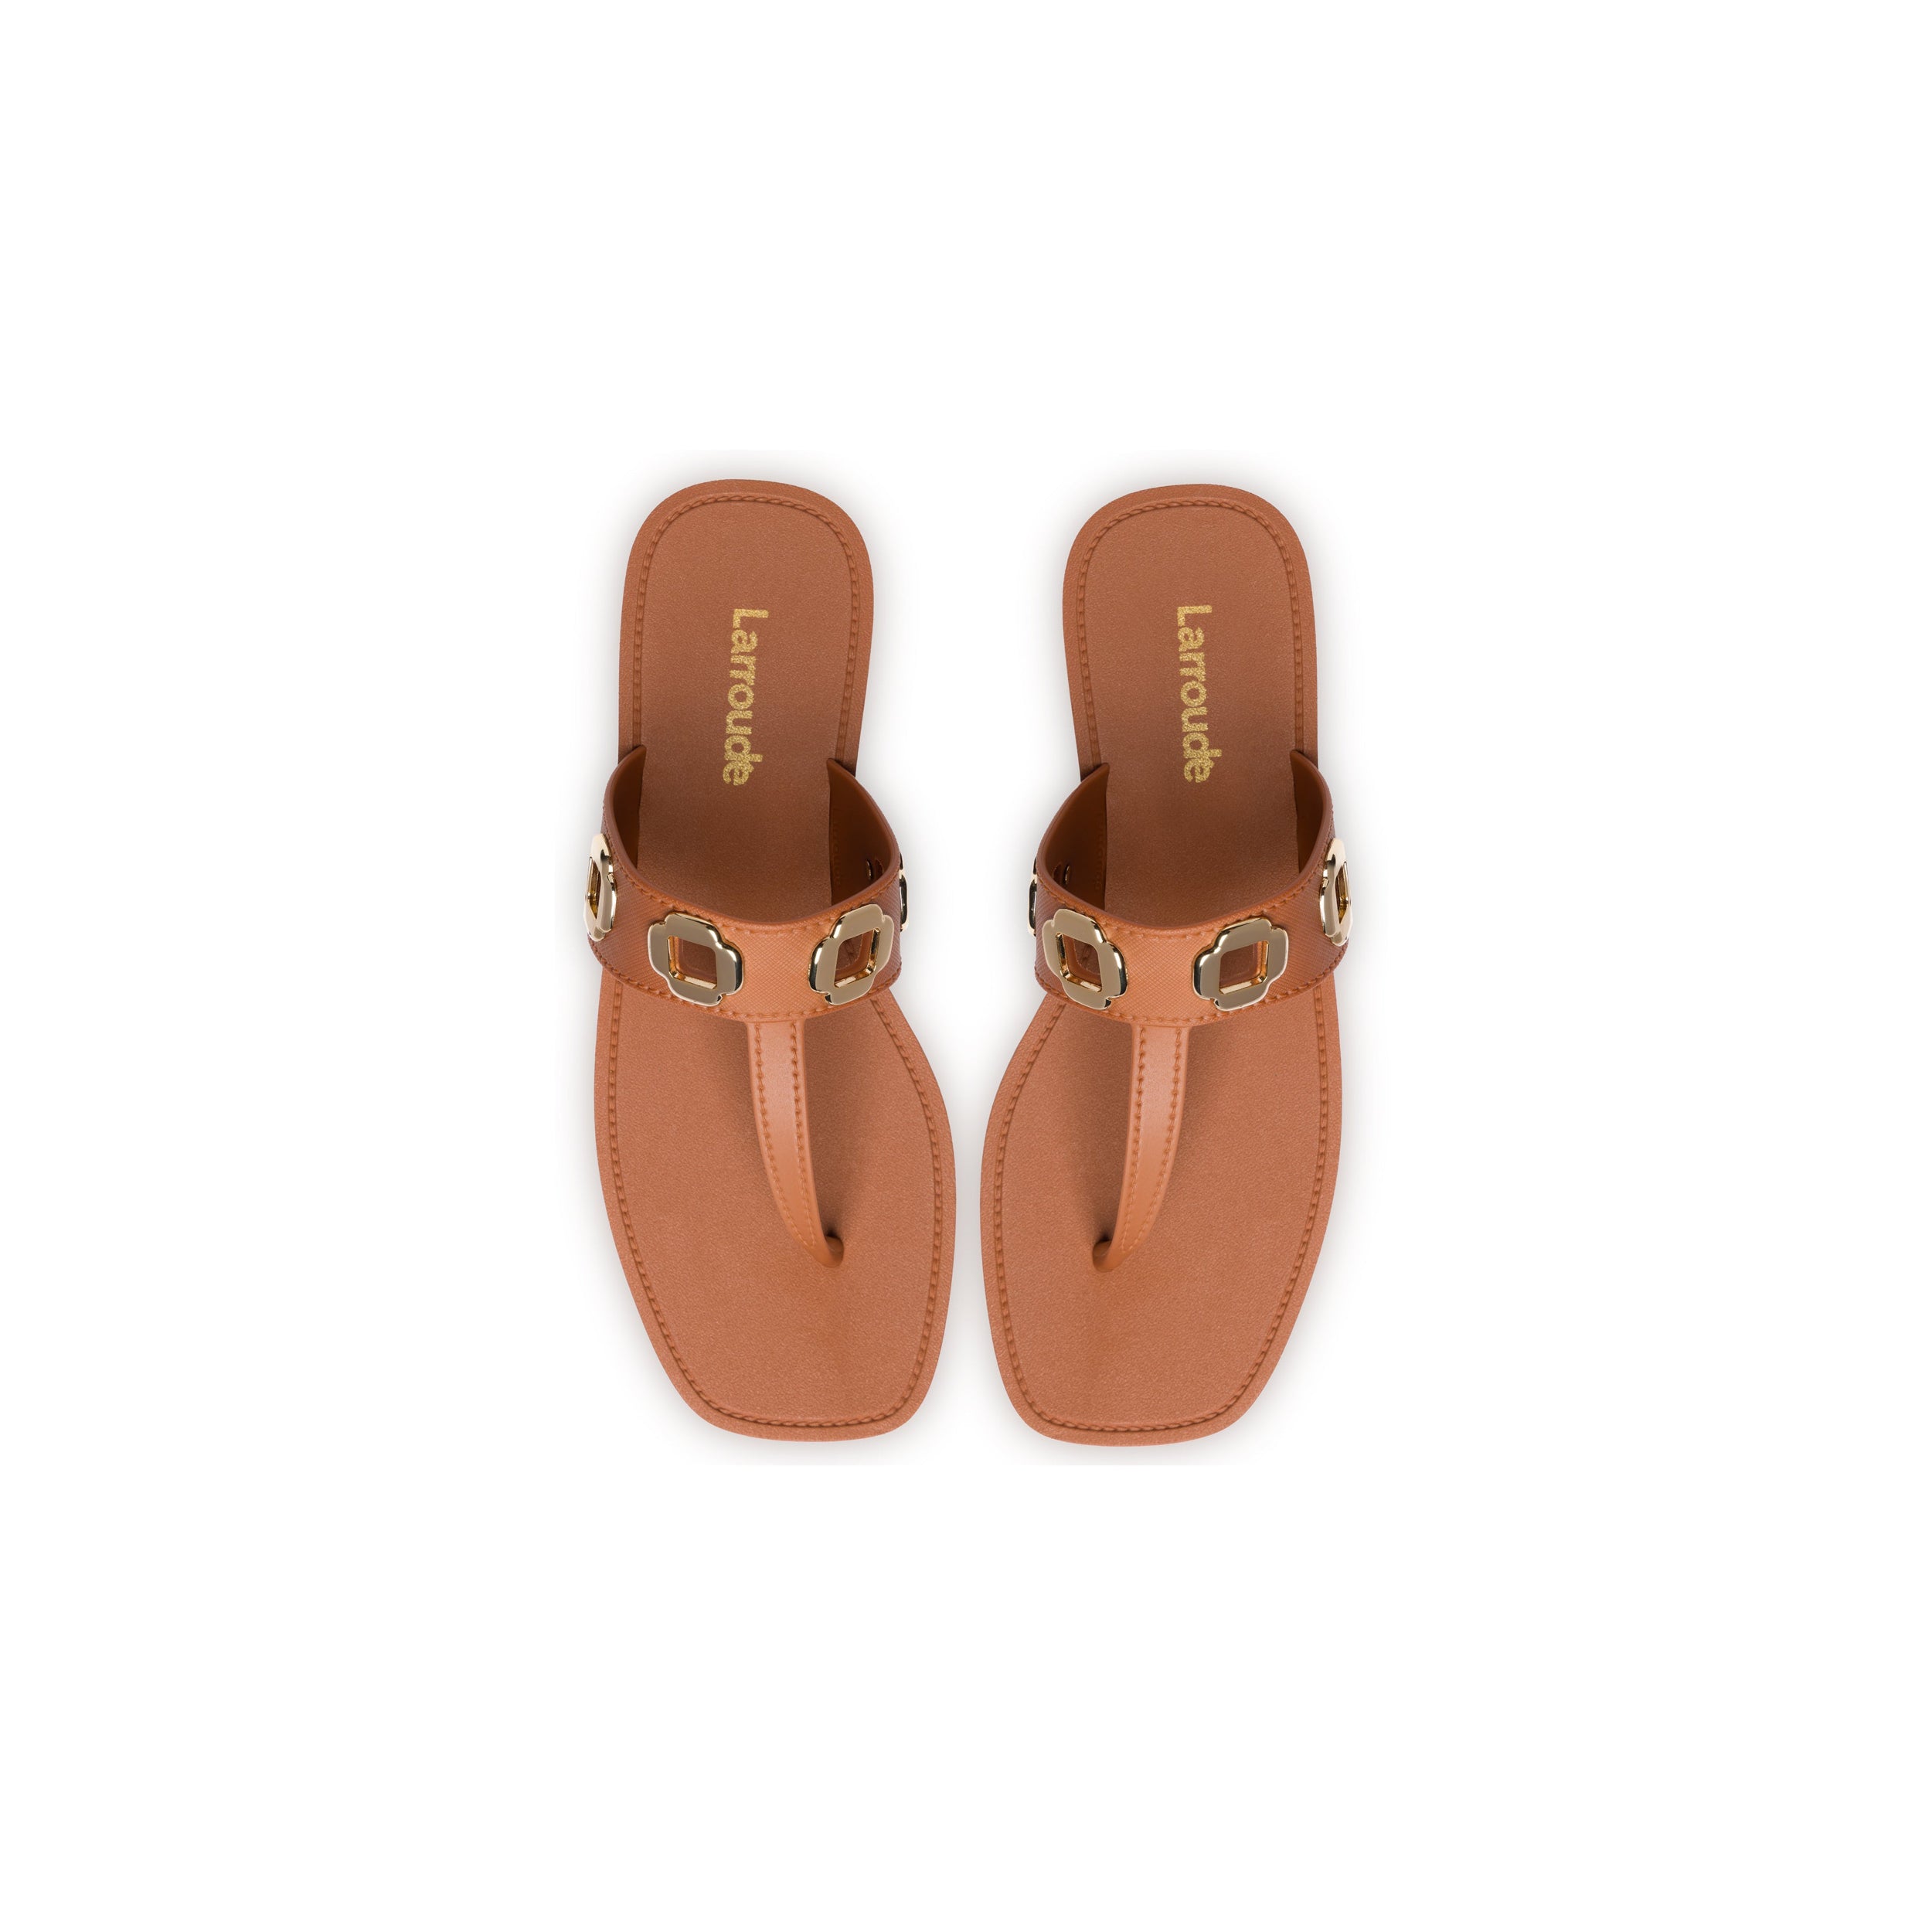 Top view of a pair of Milan S In Caramel PVC sandals with a single wide strap adorned with square gold accents. Featuring a flat sole, these classic silhouette sandals are branded "Lamoude" in gold lettering on the insole. The background is white.